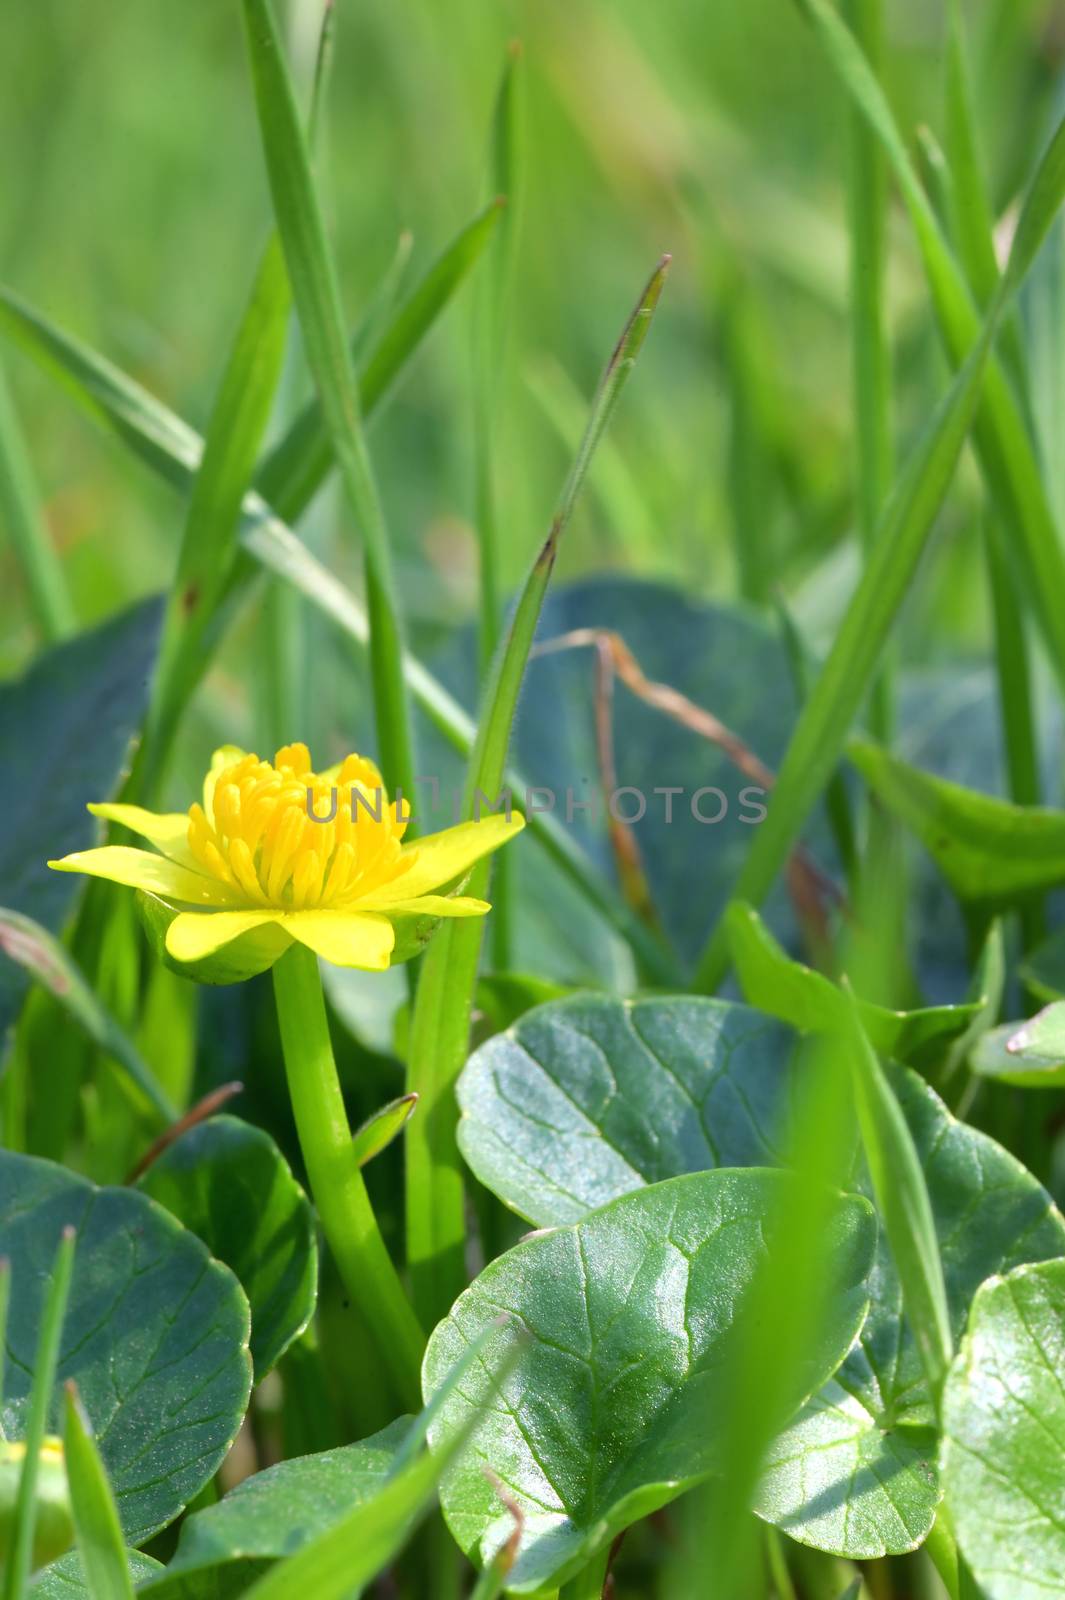 A Fig Buttercup Blooming In Spring by mady70